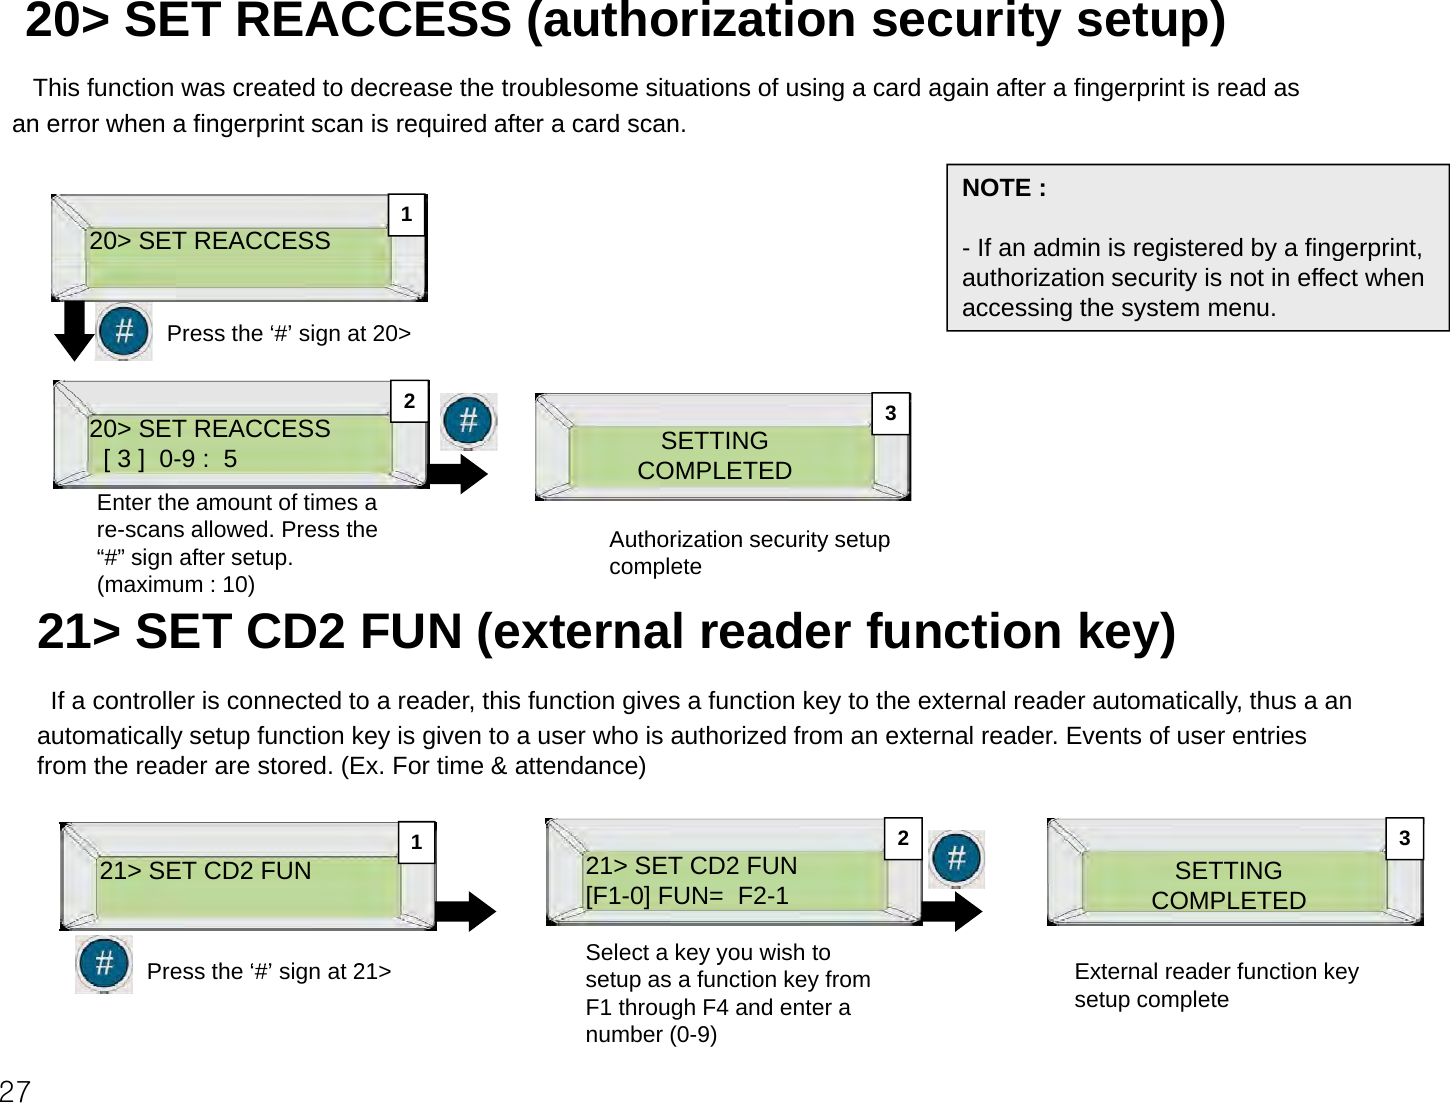 20&gt; SET REACCESS (authorization security setup)This function was created to decrease the troublesome situations of using a card again after a fingerprint is read as an error when a fingerprint scan is required after a card scanan error when a fingerprint scan is required after a card scan. 20&gt; SET REACCESSNOTE :- If an admin is registered by a fingerprint, 1Press the ‘#’ sign at 20&gt;authorization security is not in effect when accessing the system menu.220&gt; SET REACCESS[ 3 ]  0-9 :  5Enter the amount of times a re-scans allowed. Press the SETTINGCOMPLETEDAuthorization security setup23“#” sign after setup. (maximum : 10)Authorization security setup complete 21&gt; SET CD2 FUN (external reader function key)If a controller is connected to a reader, this function gives a function key to the external reader automatically, thus a an automatically setup function key is given to a user who is authorized from an external reader. Events of user entries from the reader are stored. (Ex. For time &amp; attendance)21&gt; SET CD2 FUNP th ‘#’ i t 2121&gt; SET CD2 FUN[F1-0] FUN=  F2-1Select a key you wish to SETTINGCOMPLETEDEt l d f ti k12 327Press the ‘#’ sign at 21&gt;yysetup as a function key from F1 through F4 and enter a number (0-9)External reader function key setup complete